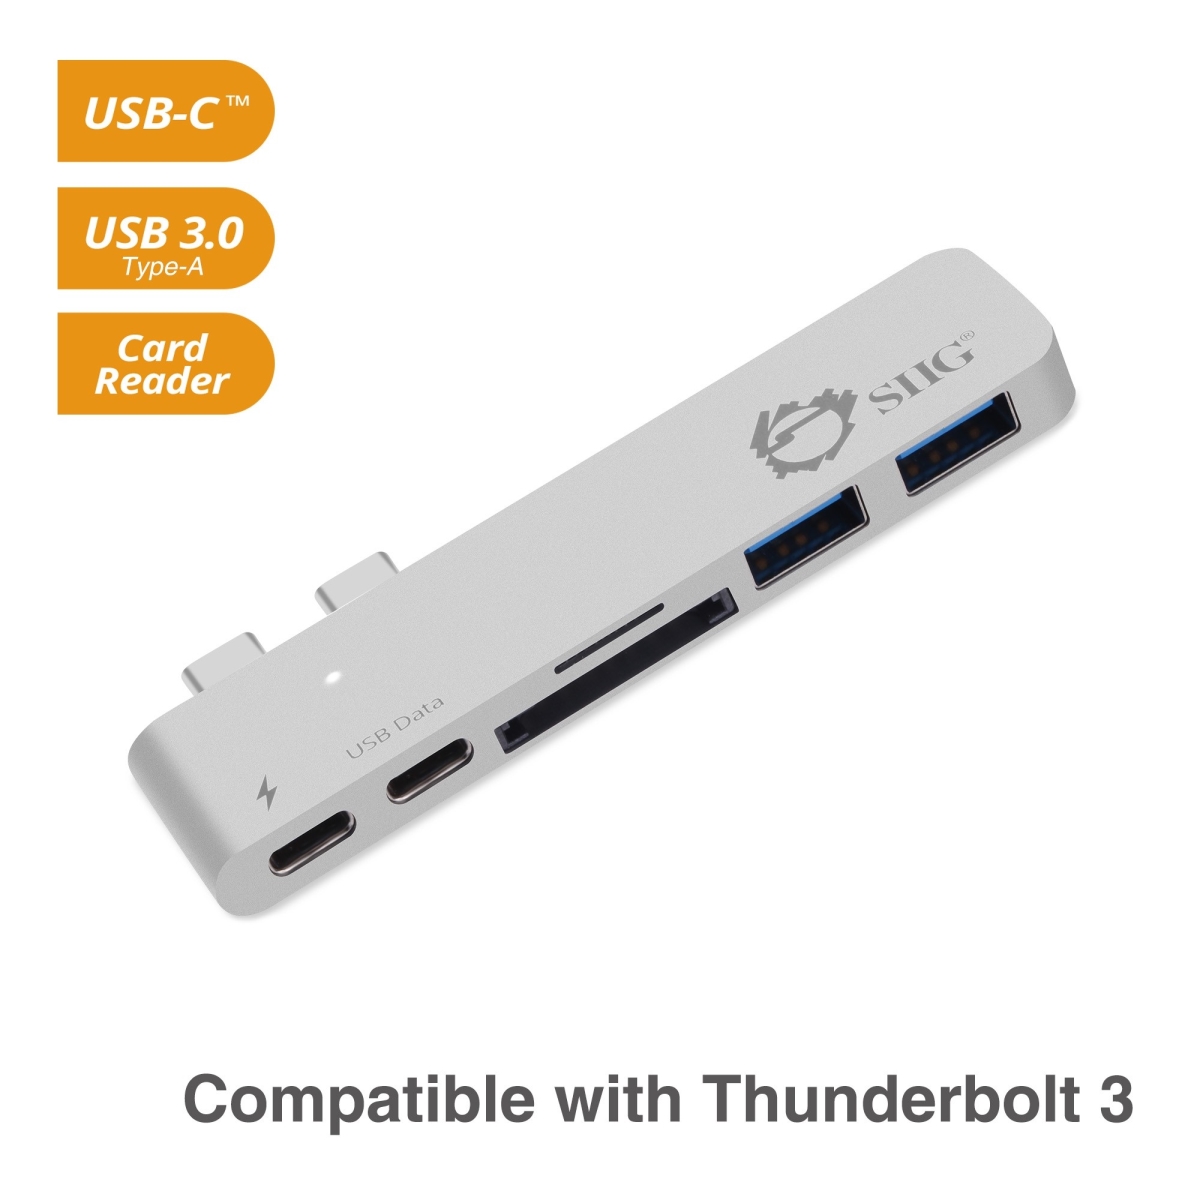 Picture of SIIG JU-TB0212-S1 Thunderbolt 3 USB-C Hub with Card Reader & PD Adapter - Silver